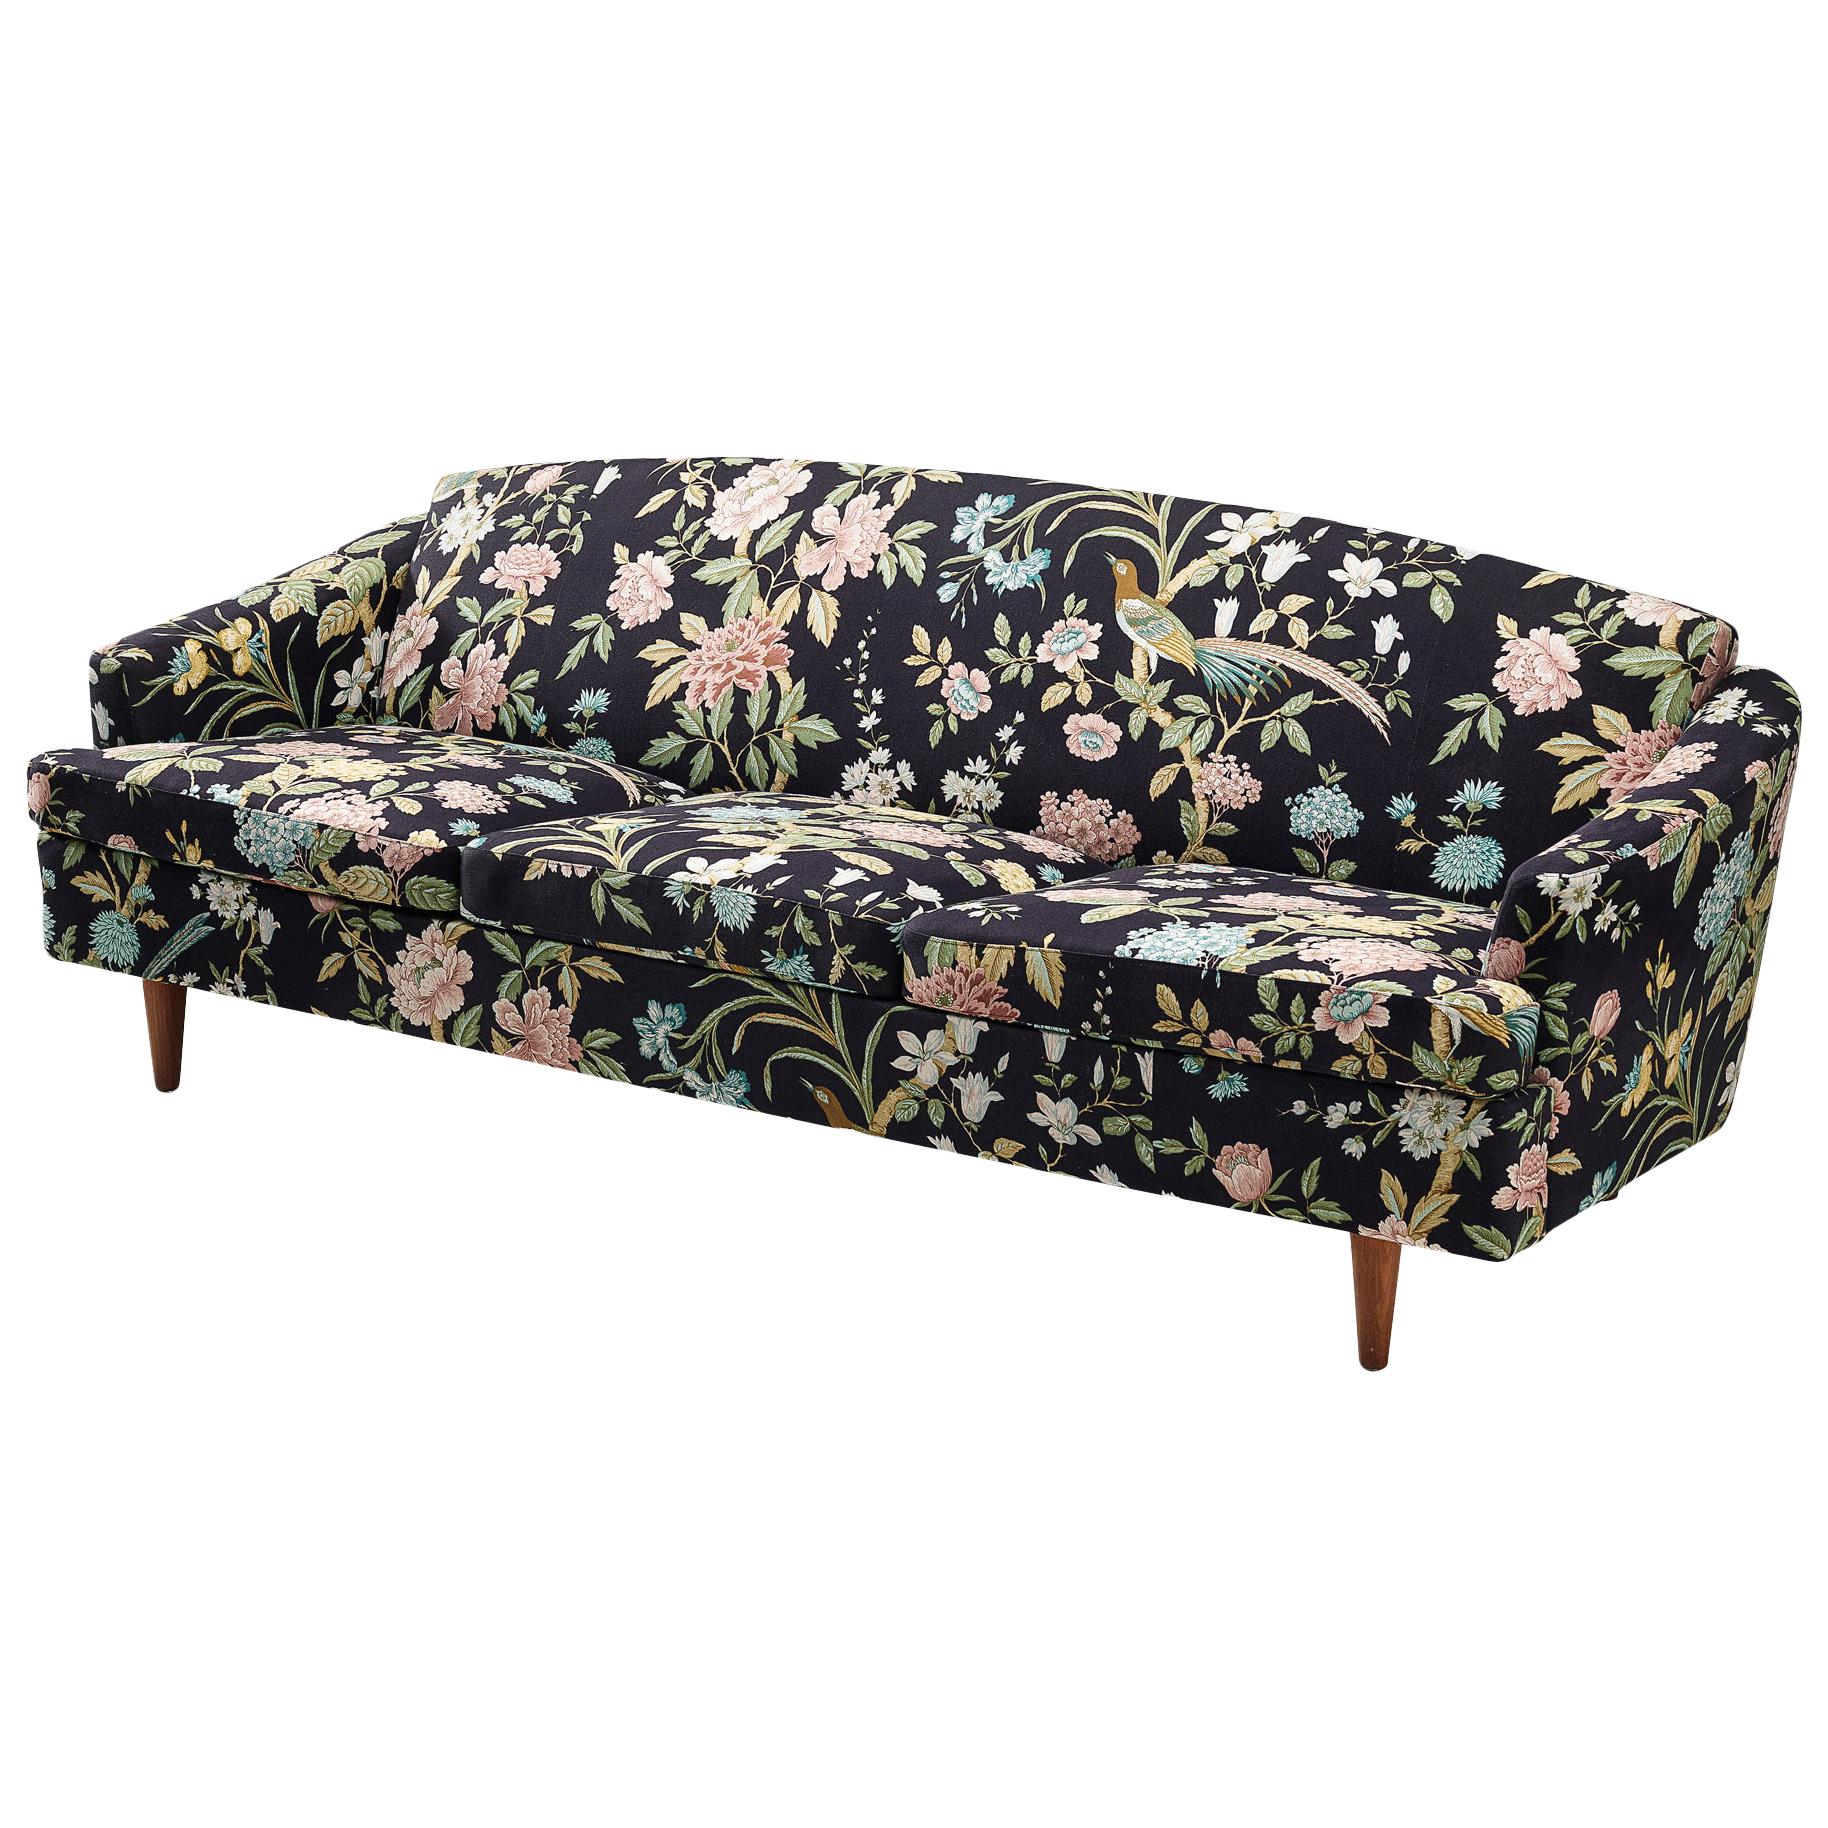 Danish Sofa in Floral Upholstery